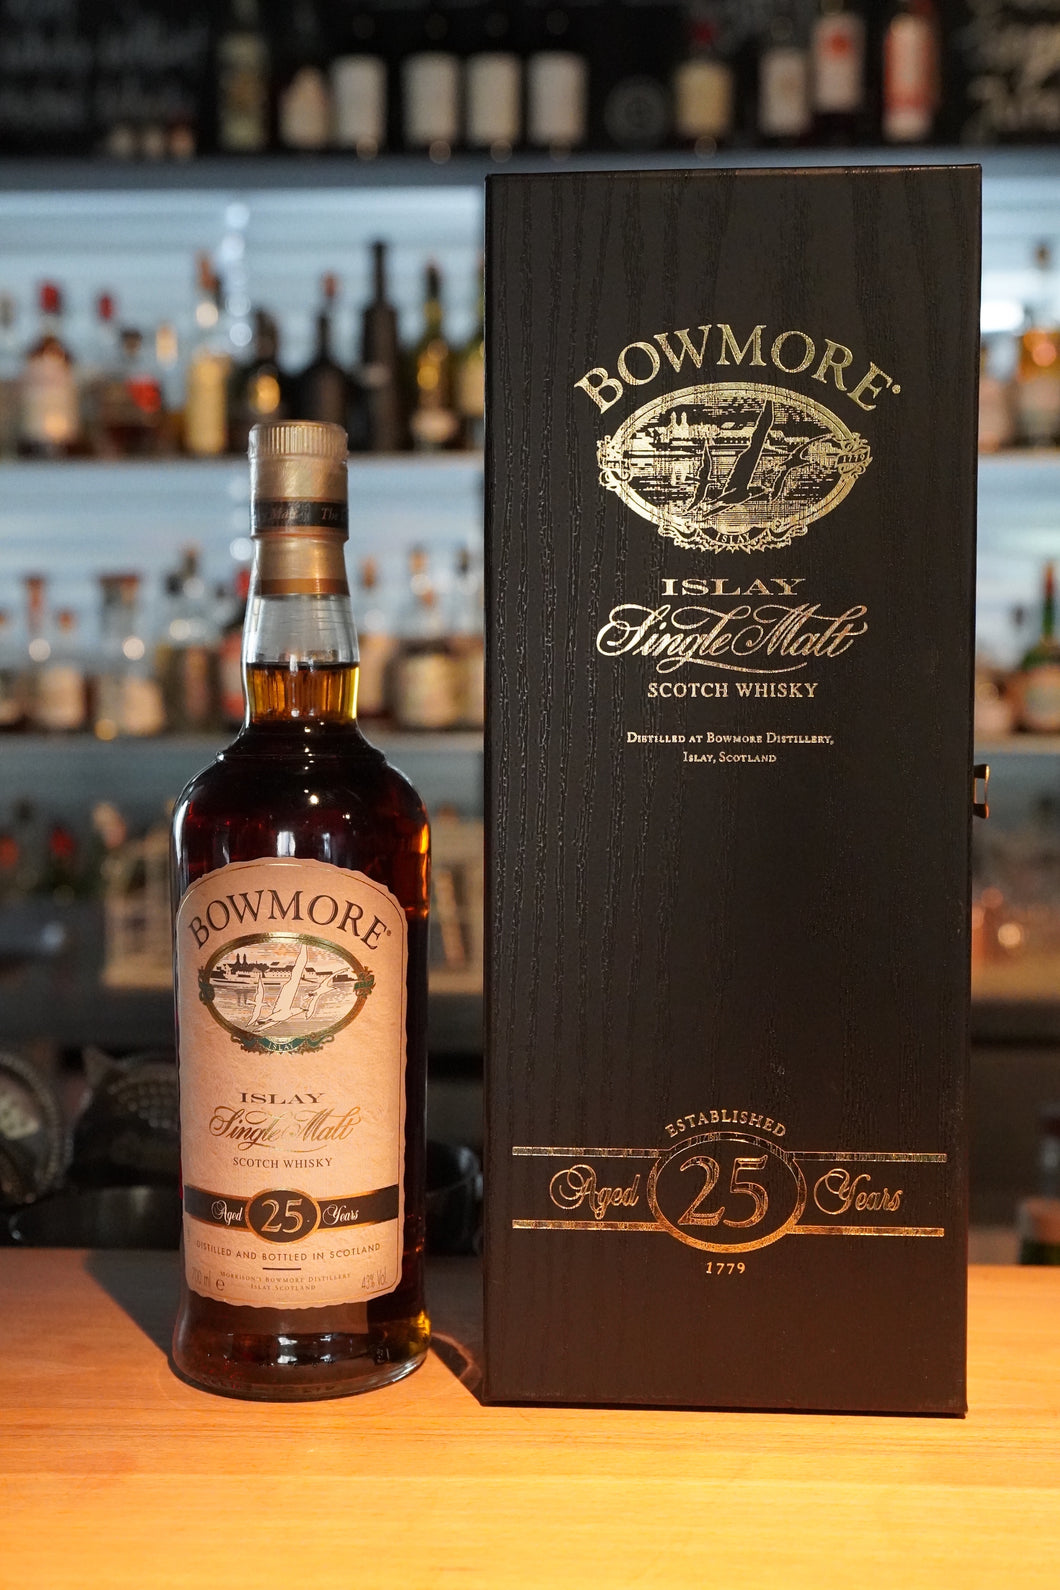 Bowmore 25 Years old presentation